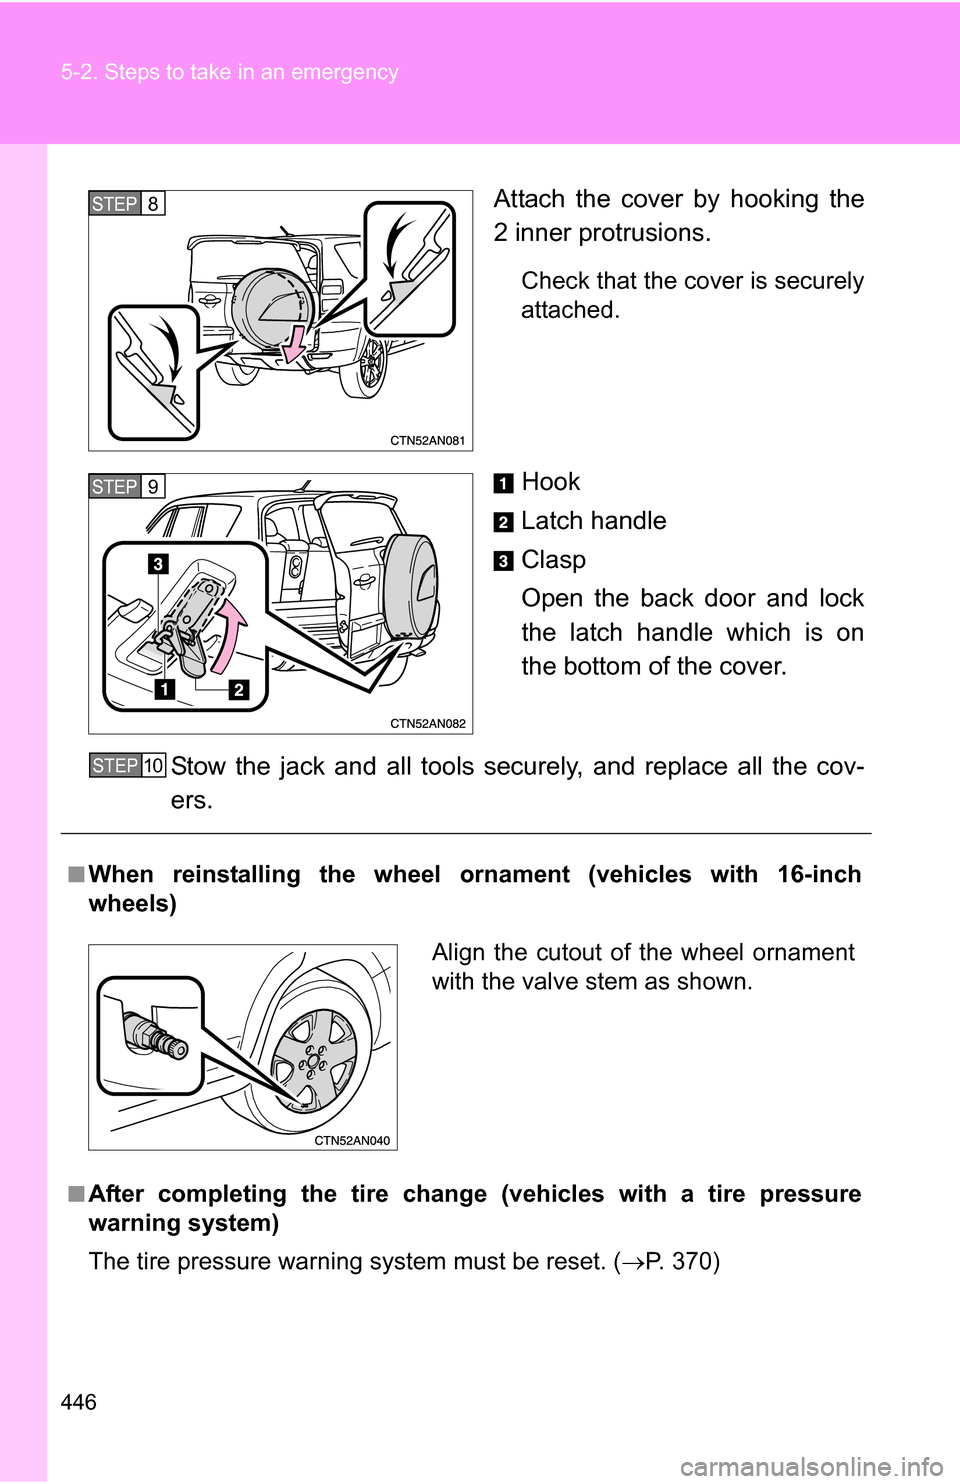 TOYOTA RAV4 2009 XA30 / 3.G Owners Manual 446 5-2. Steps to take in an emergency
Attach the cover by hooking the
2 inner protrusions.
Check that the cover is securely
attached.
Hook
Latch handle
Clasp
Open the back door and lock
the latch han